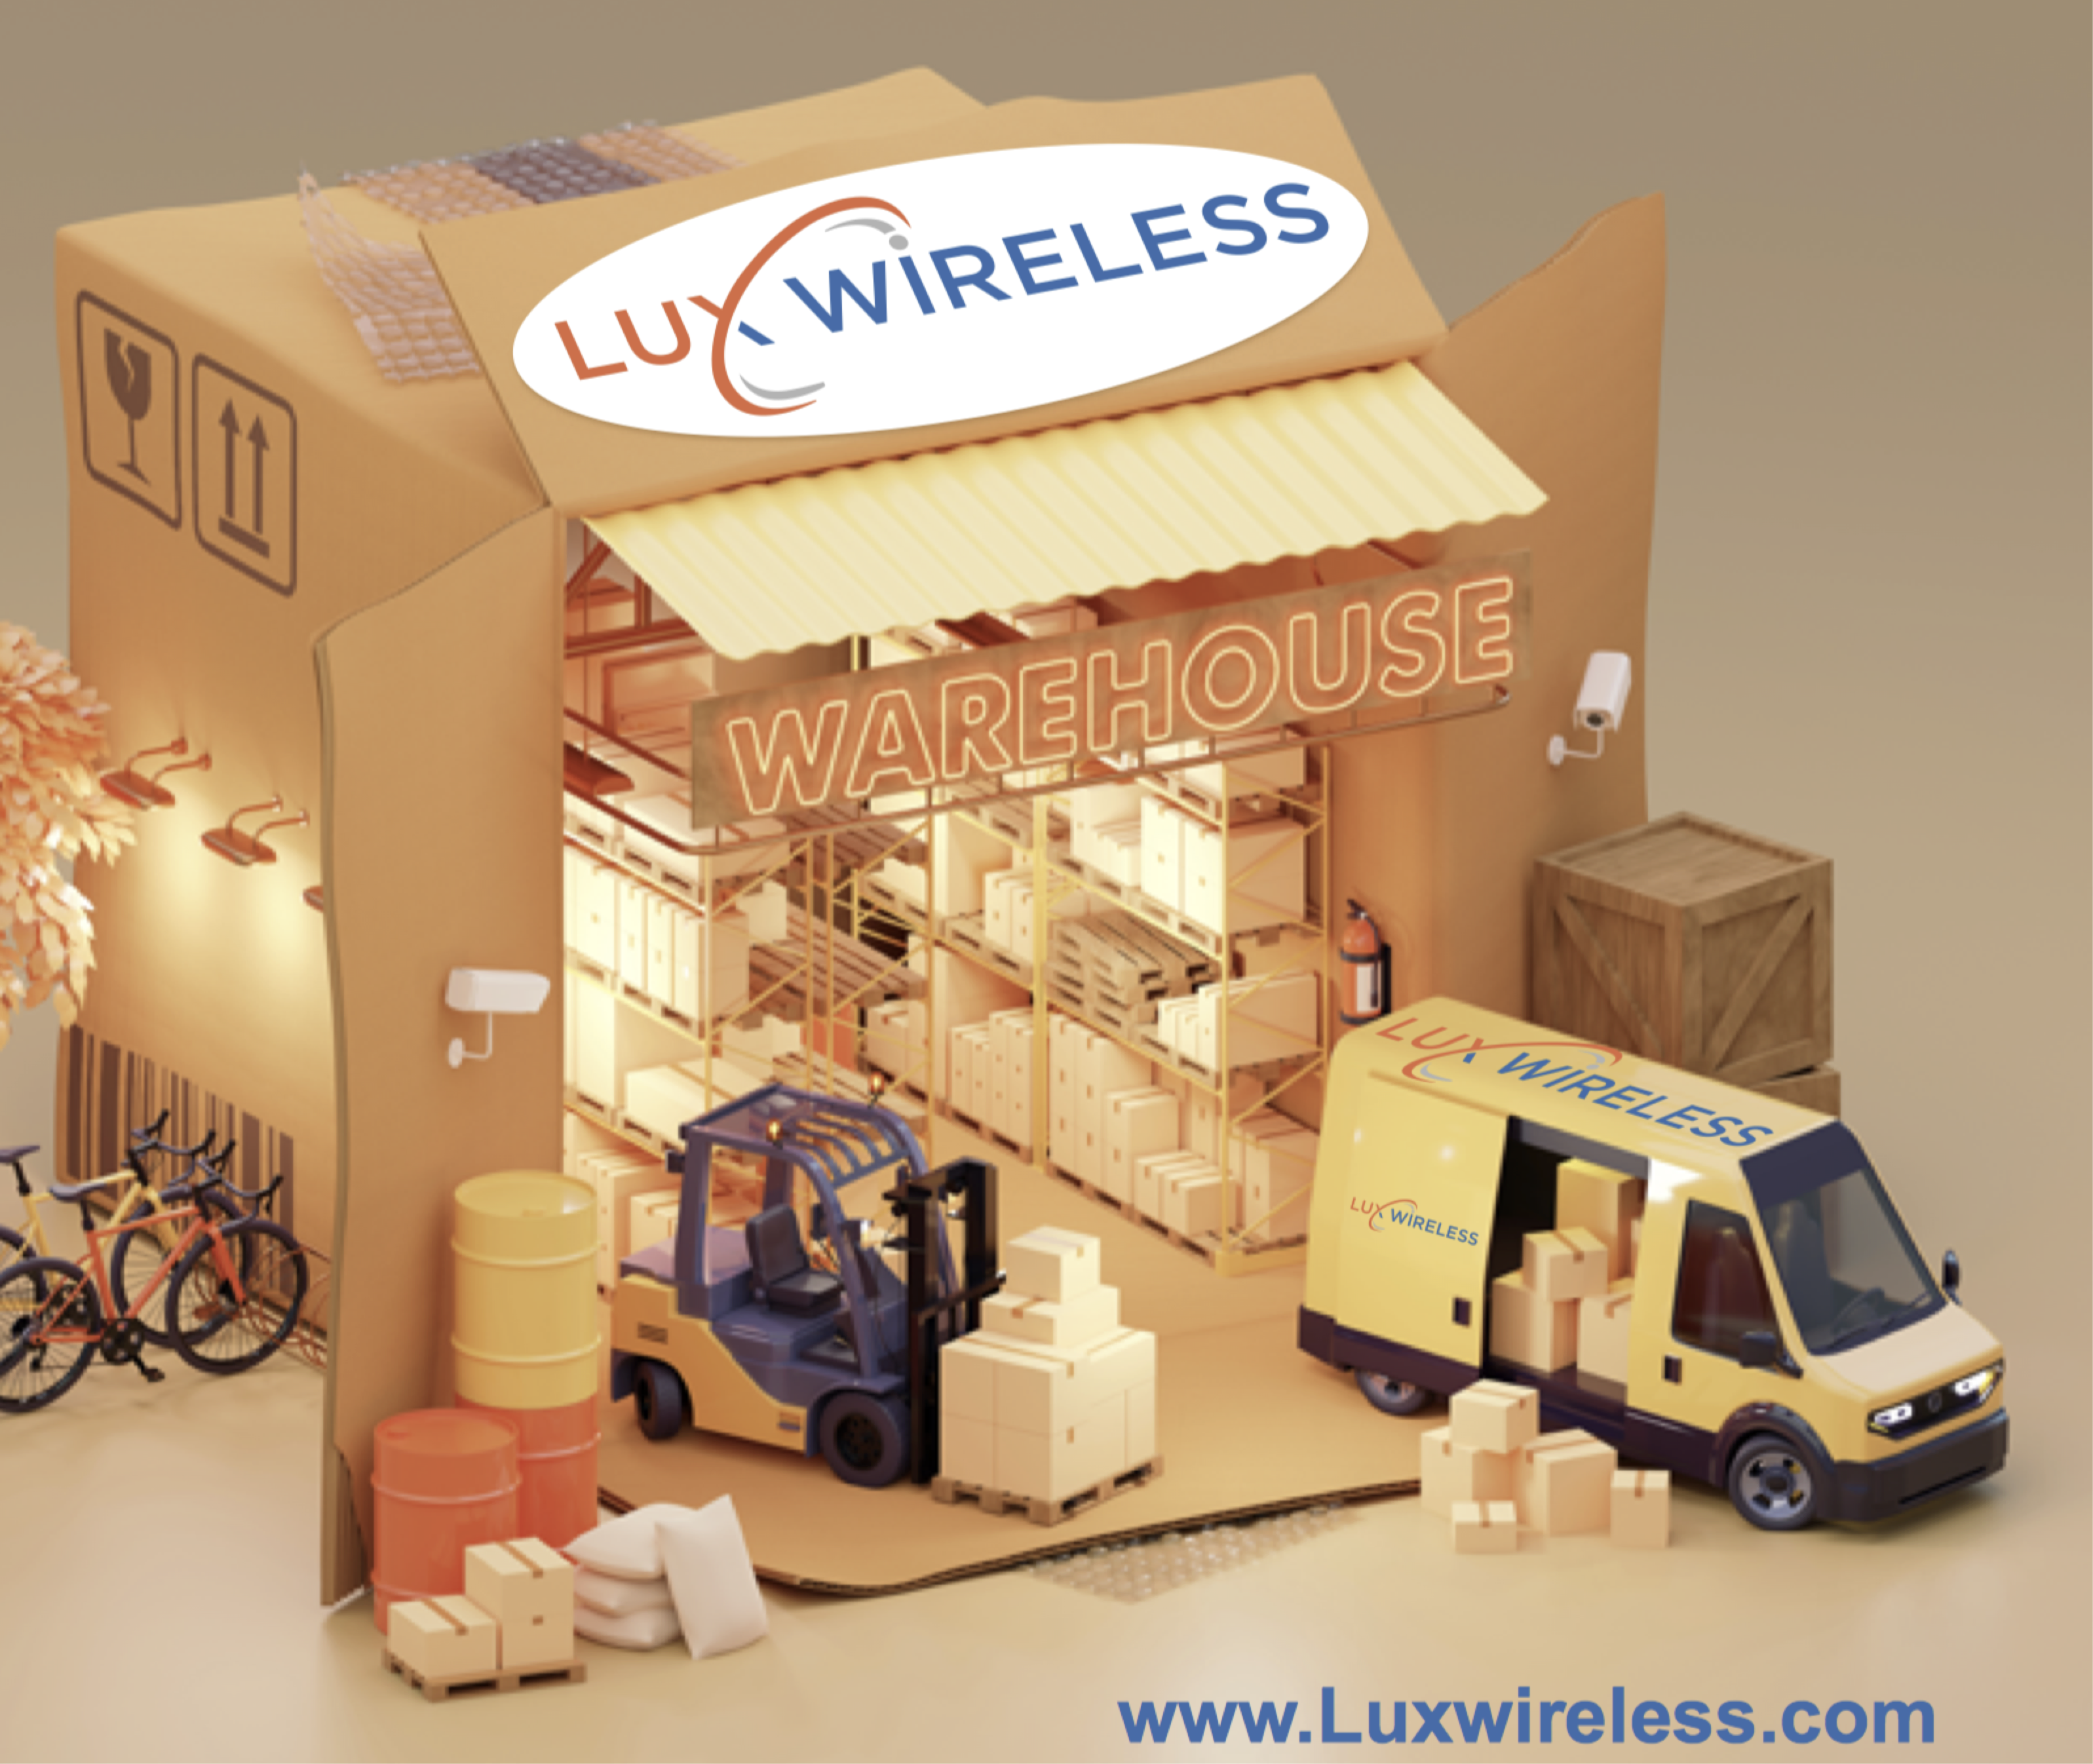 We want Our Dealers to Belong at Lux Wireless!